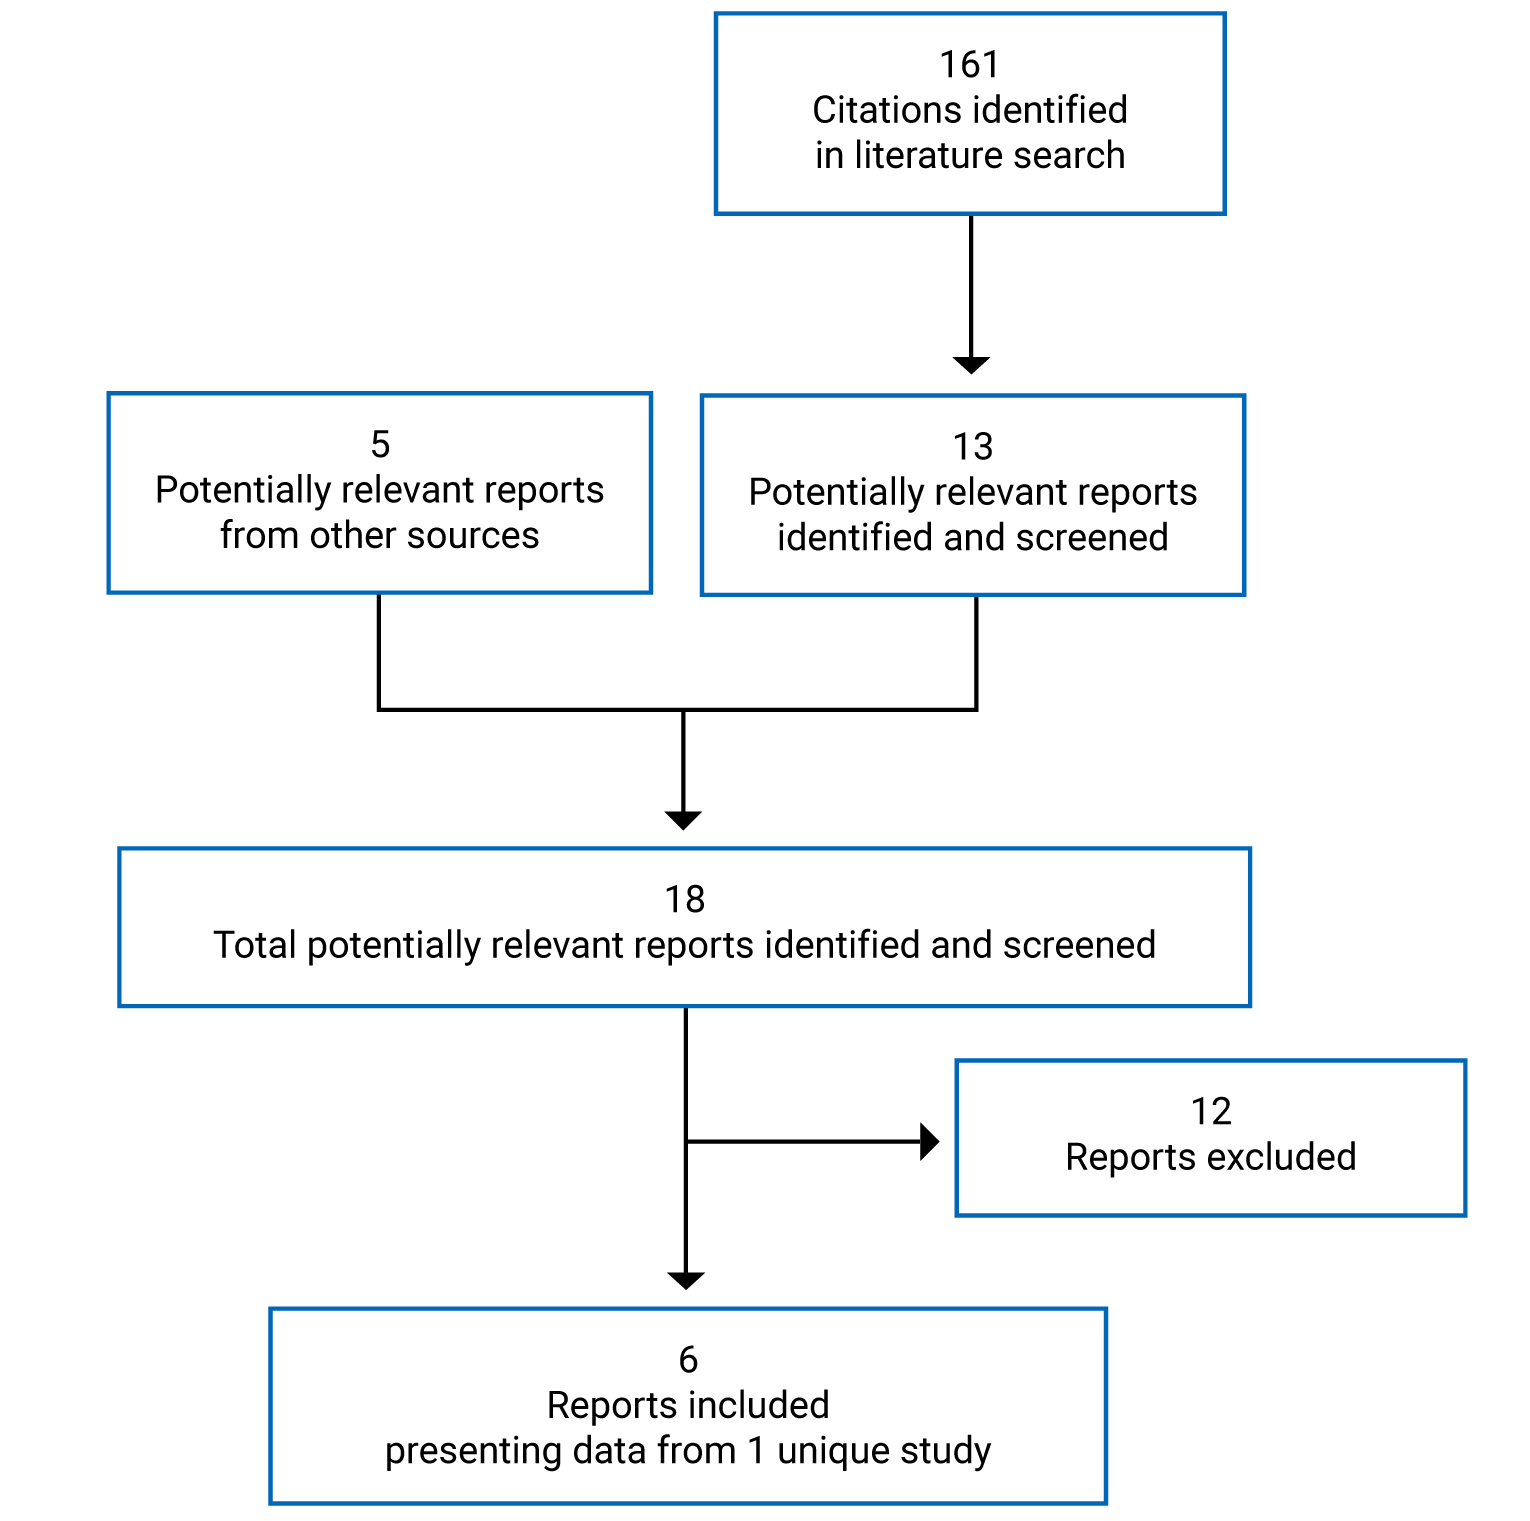 161 citations were identified in the literature search, of which 13 potentially relevant reports were identified and screened; 5 additional potentially relevant reports were identified from other sources. Twelve reports were excluded; in total, 6 reports presenting data from 1 unique study were included in the review.